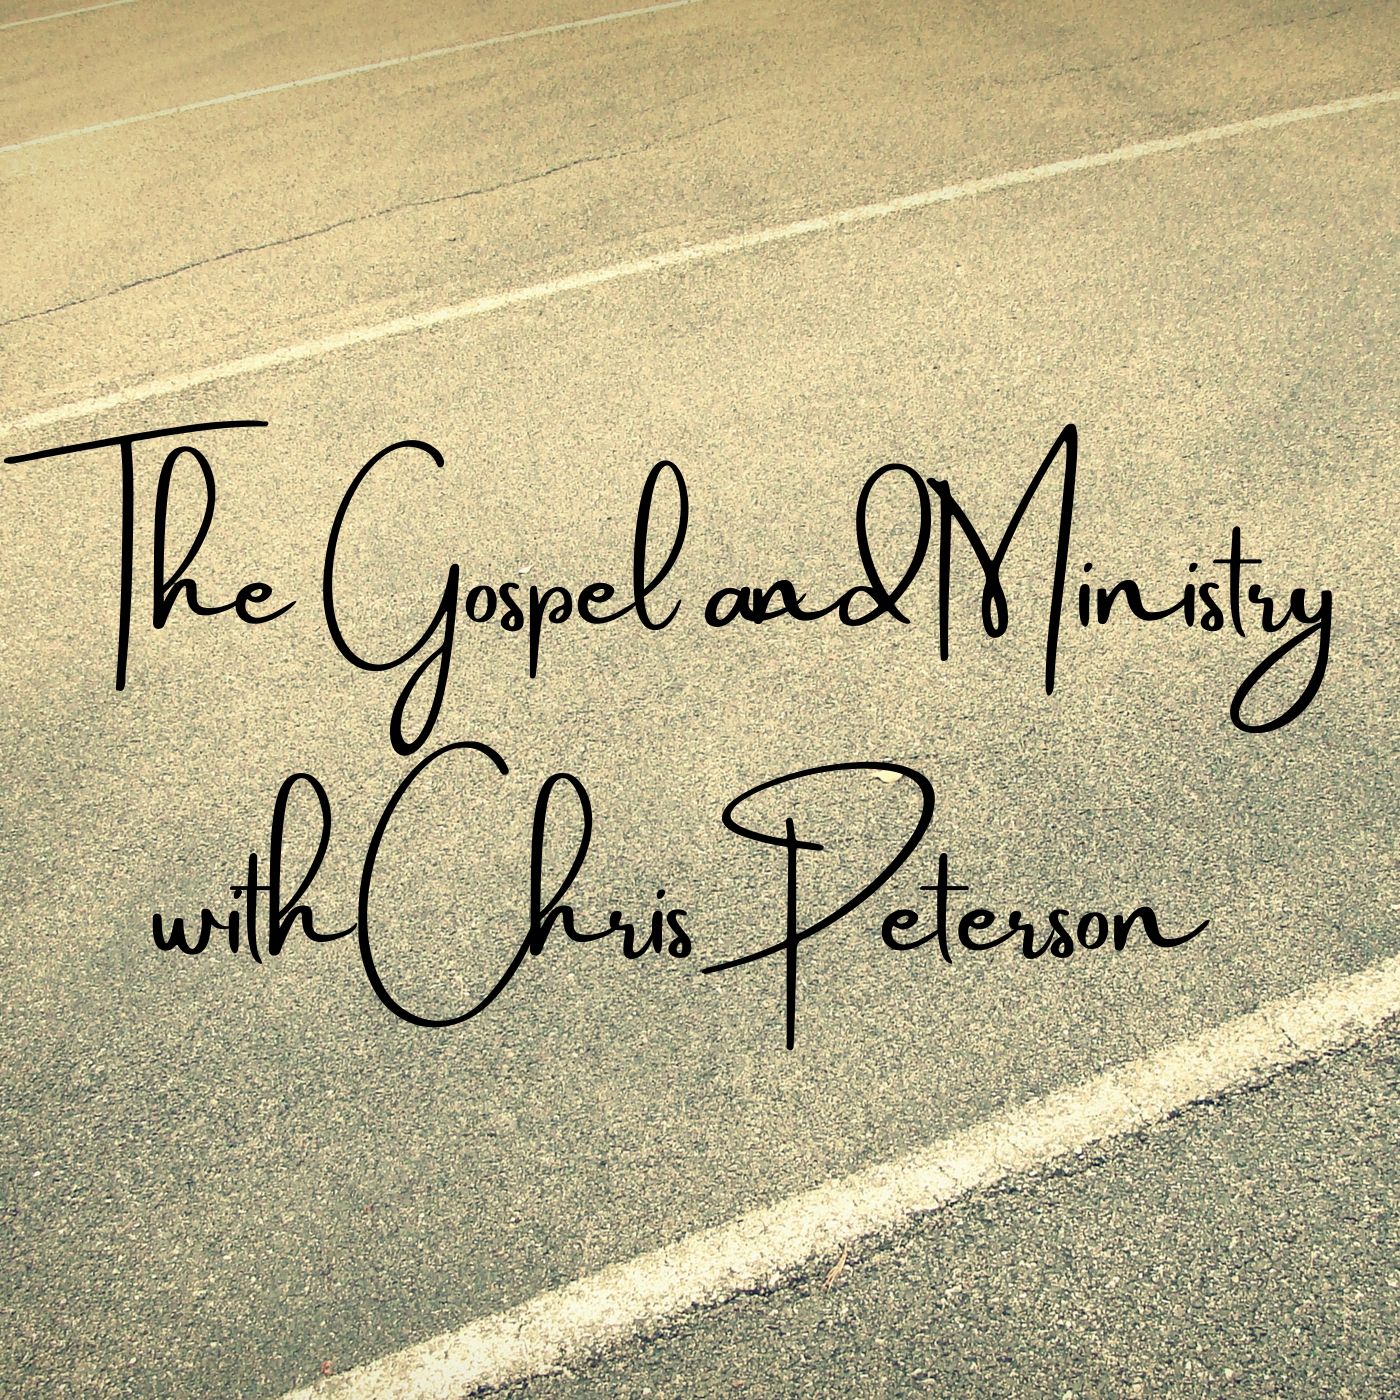 #41 The Gospel and Ministry with Chris Peterson